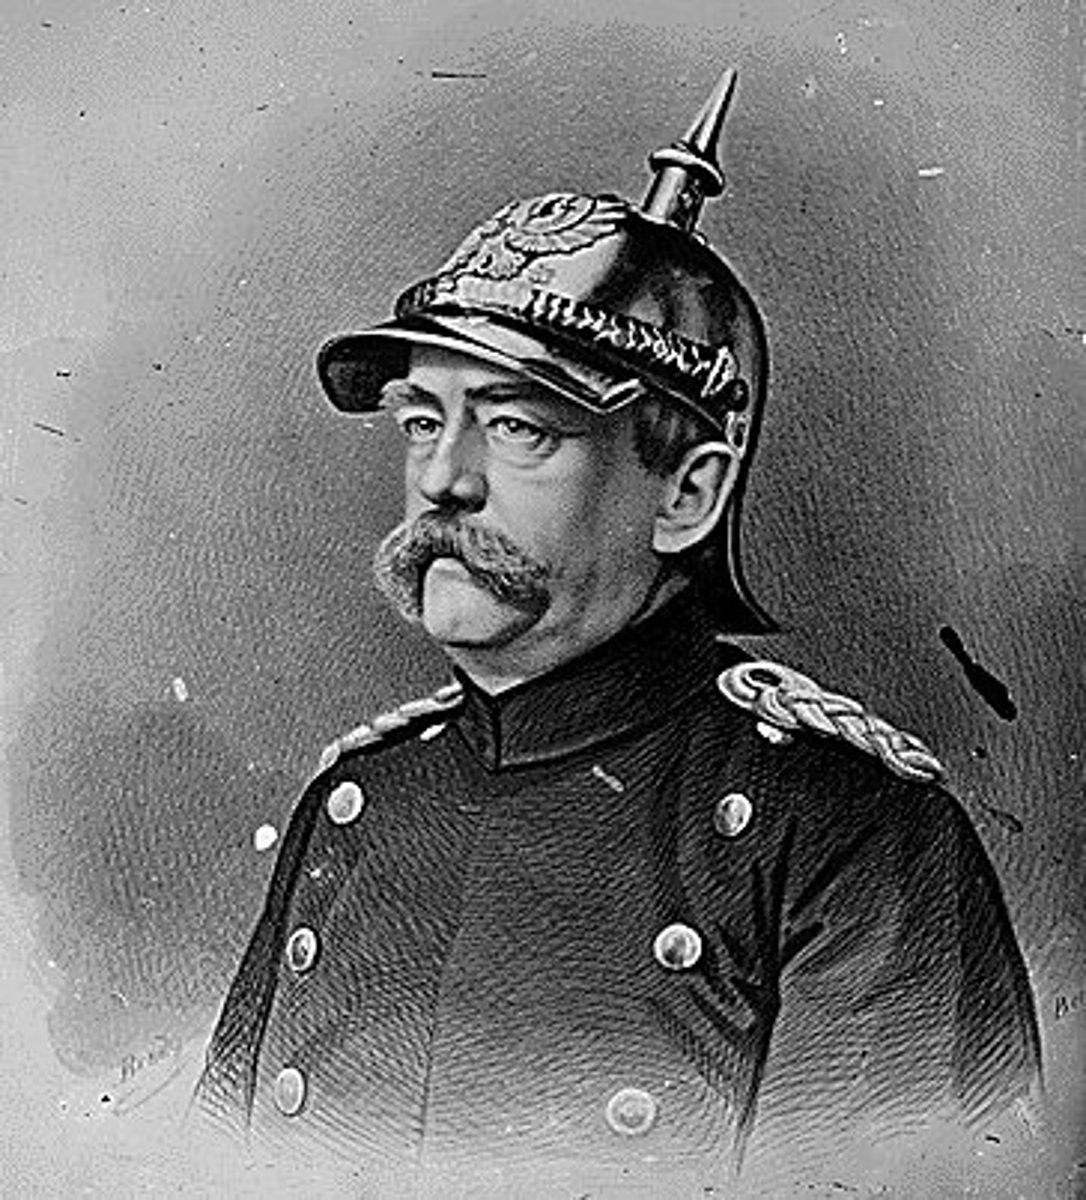 <p>Chancellor of Prussia from 1862 until 1871, when he became chancellor of Germany. A conservative nationalist, he led Prussia to victory against Austria (1866) and France (1870) in order to create a sense of national unity; assisted German unification in 1871</p>